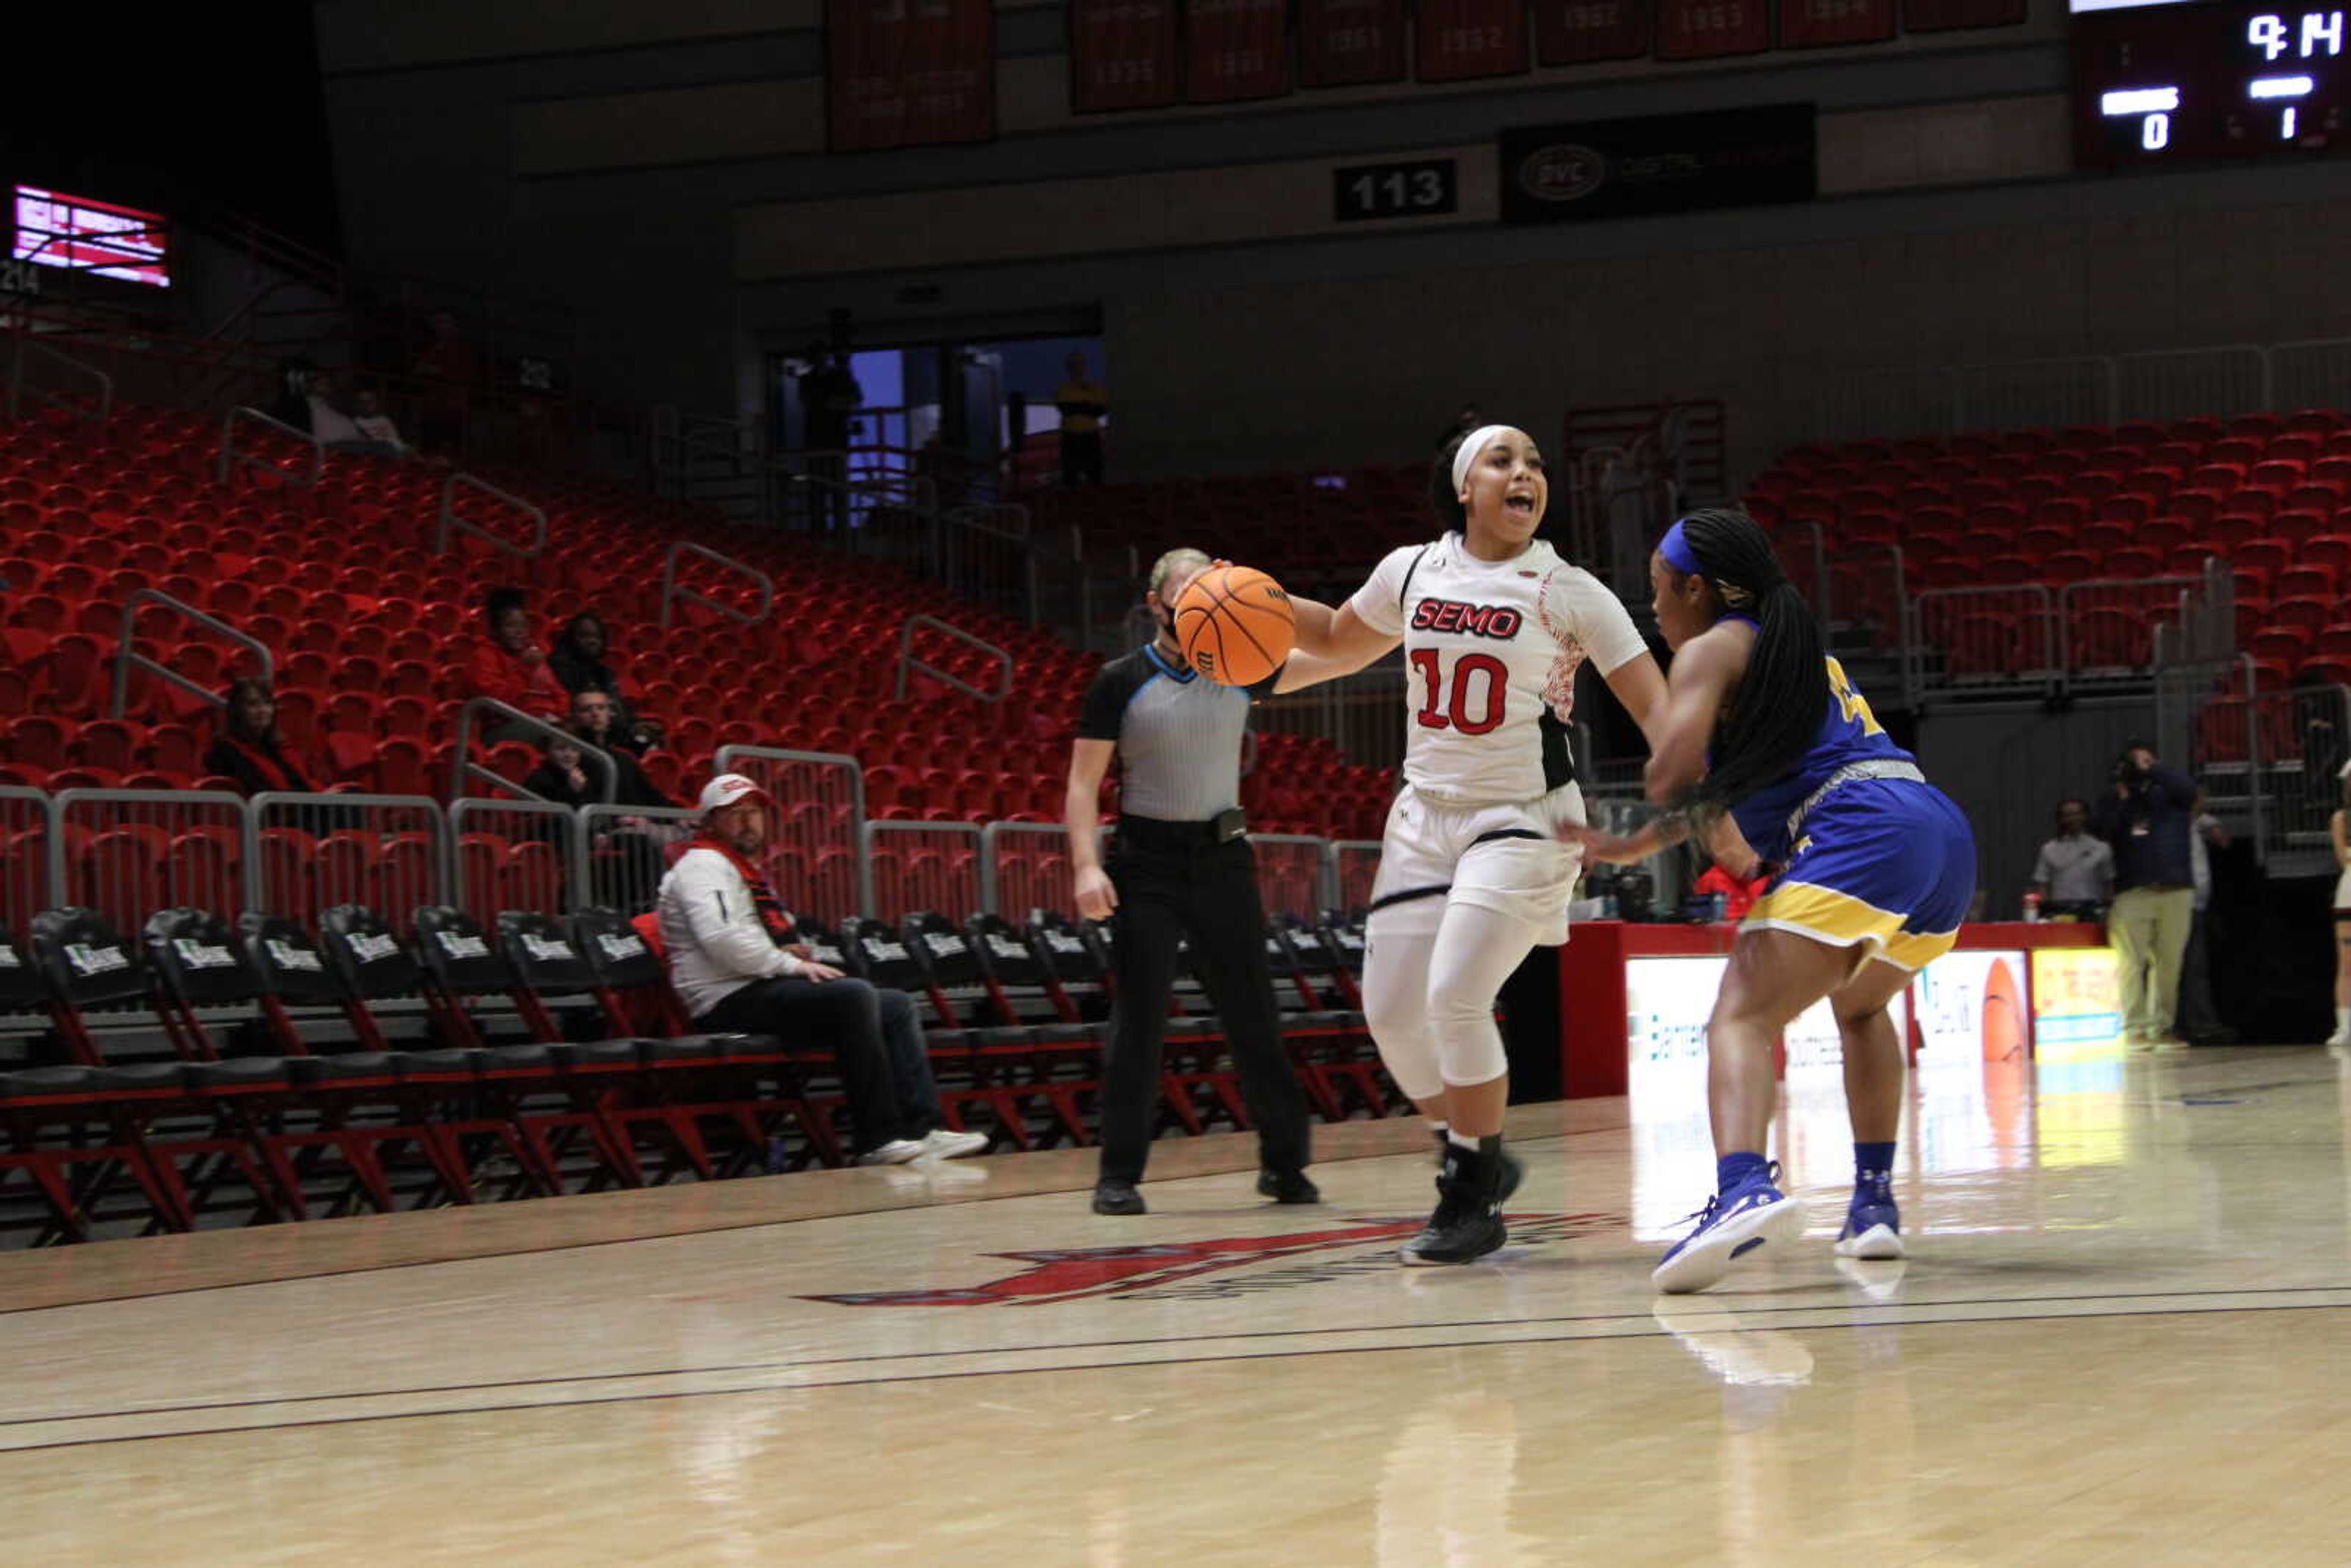 Senior guard Taelour Pruitt calls out a play during SEMO's game against Morehead State on Jan. 27.This game marked coached Rekha Patterson's 100th SEMO win.